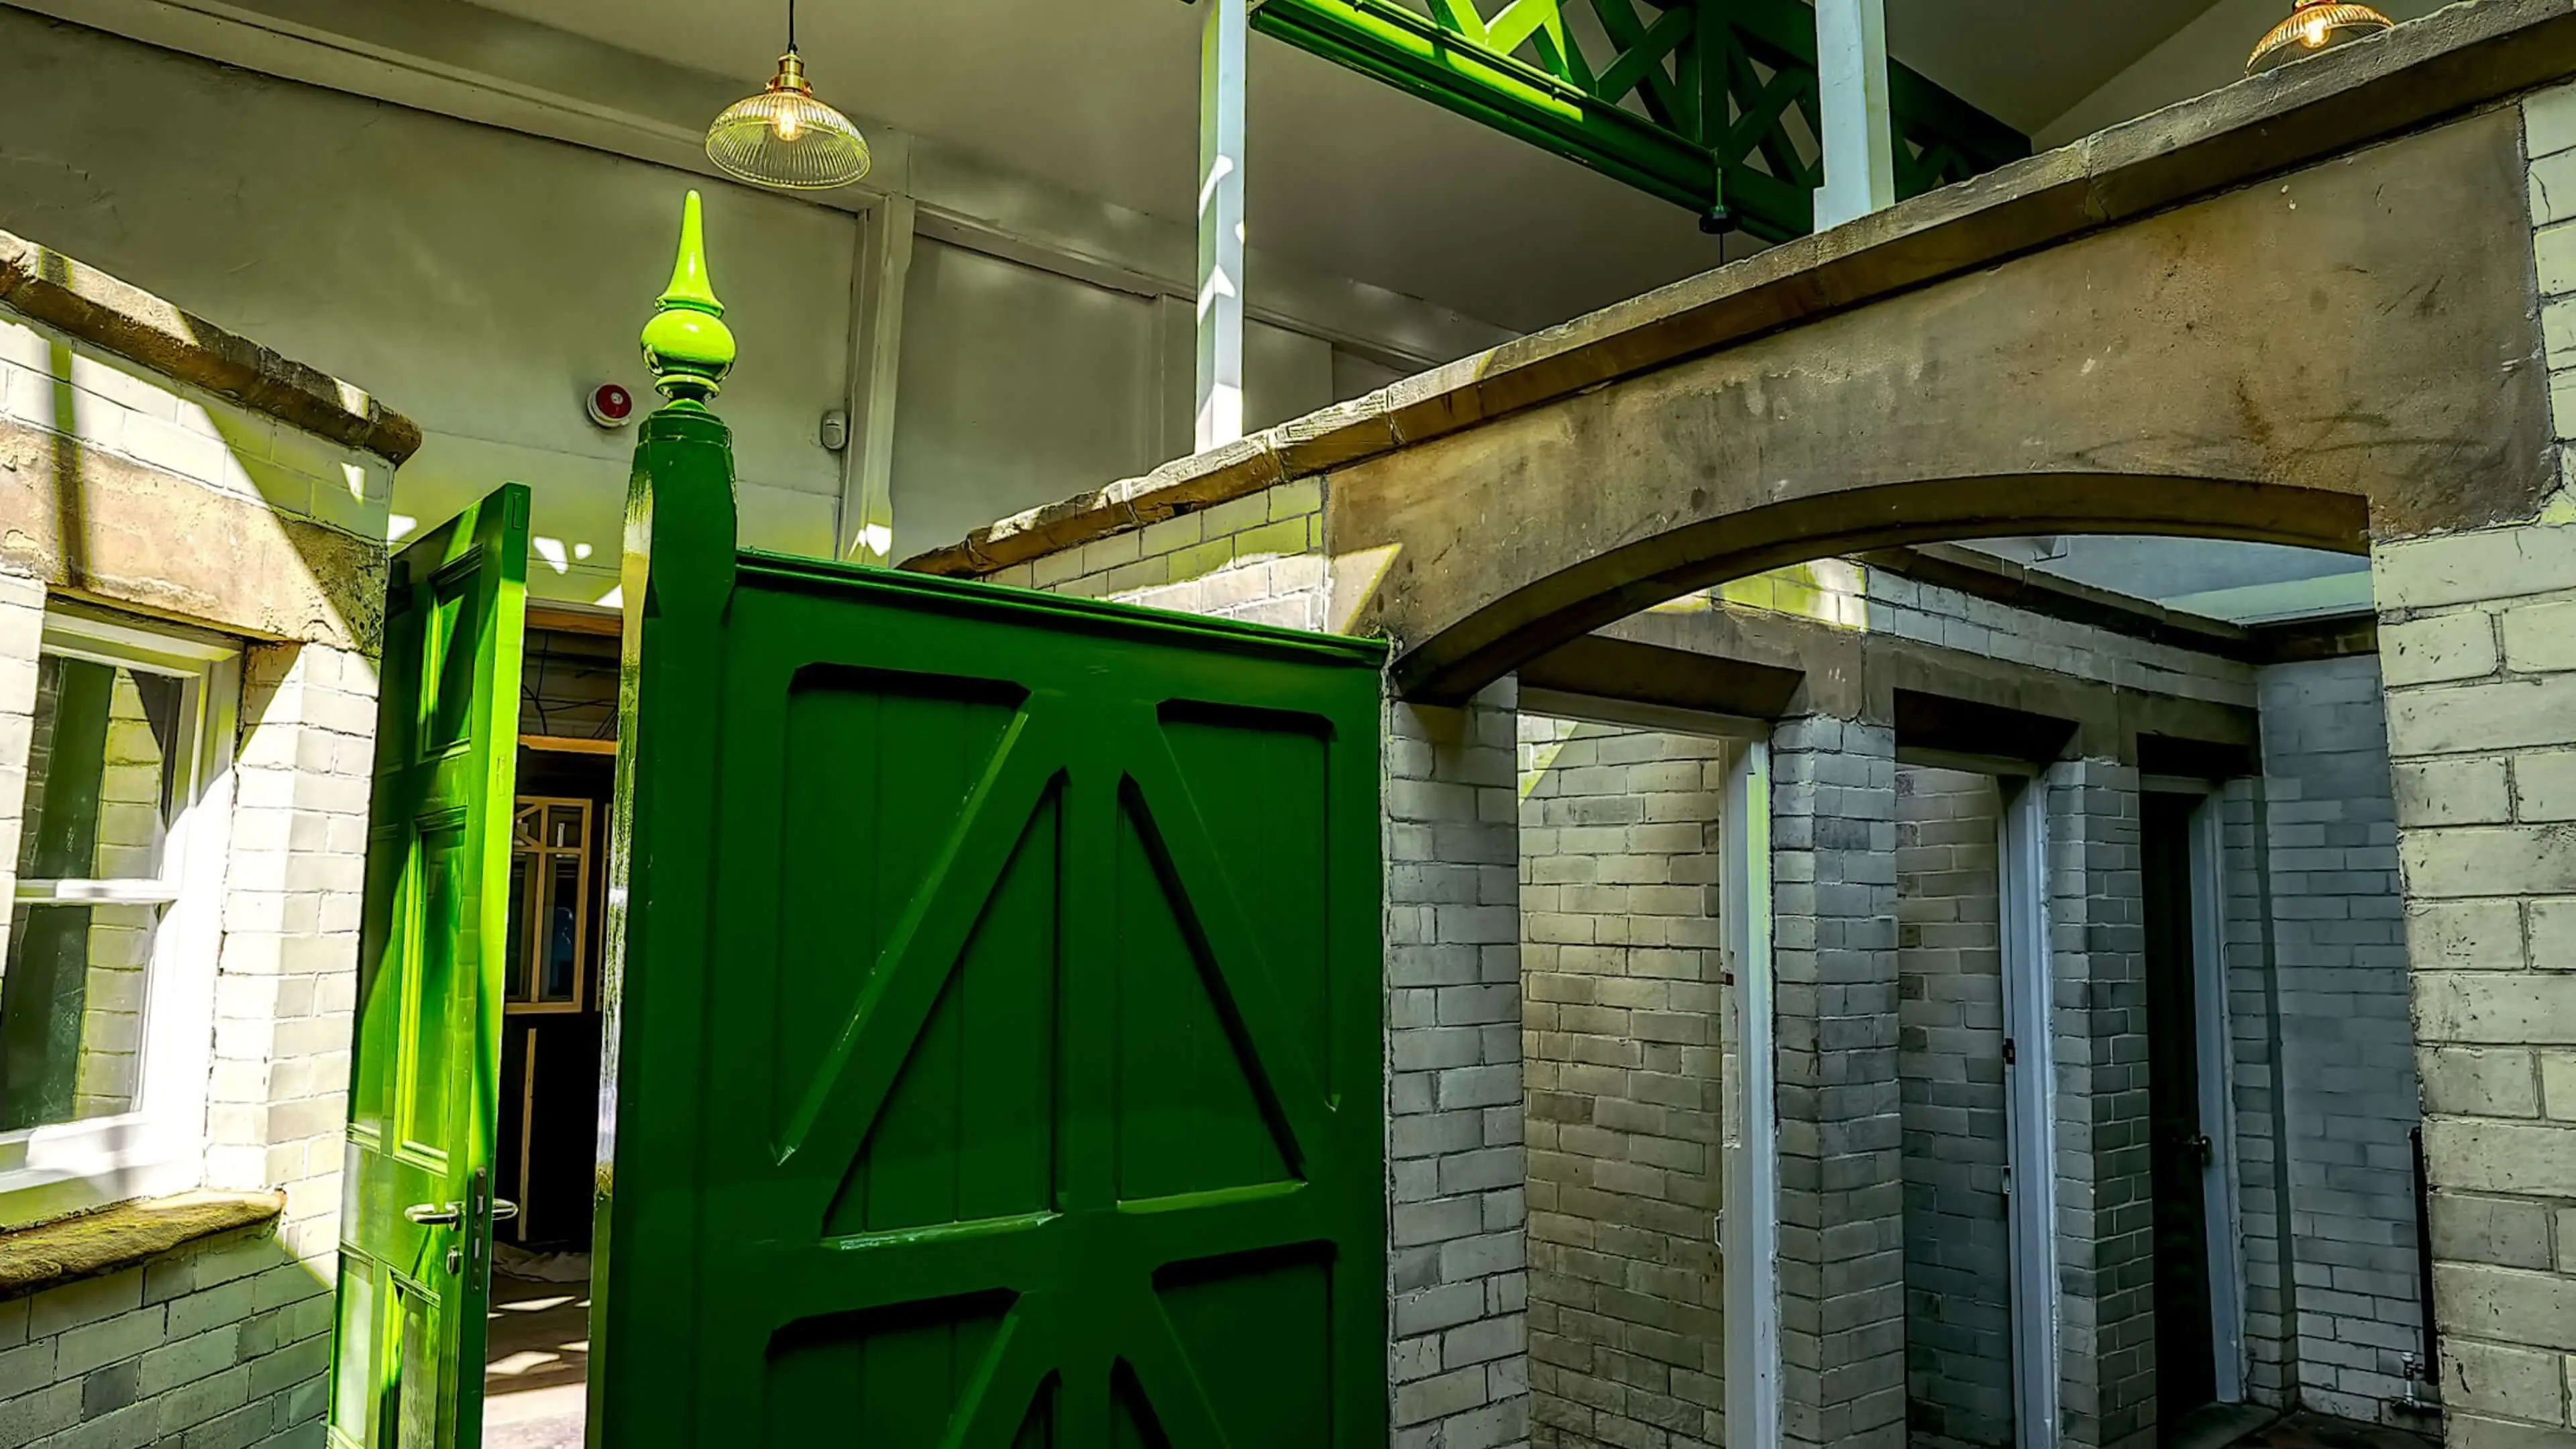 Old brick Victorian toilet block with green wooden features